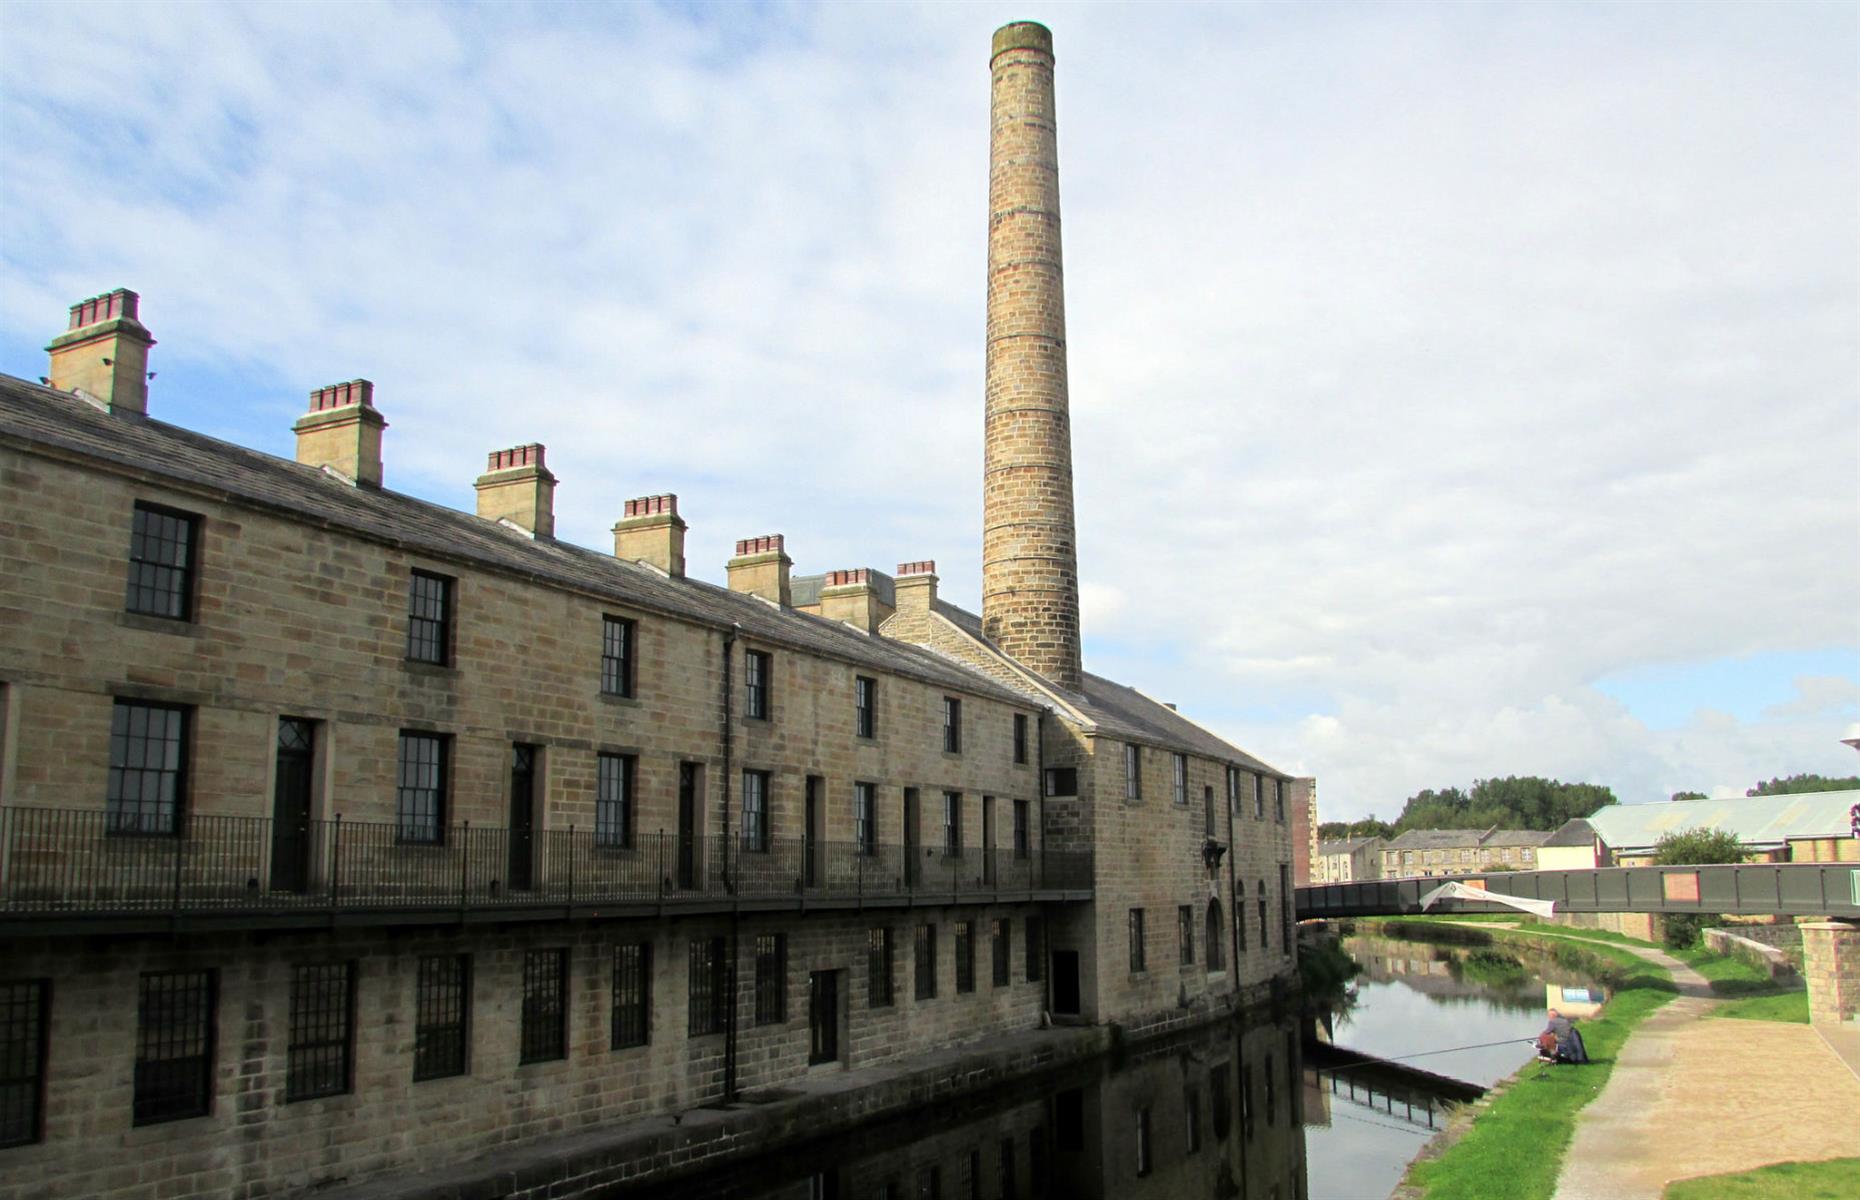 Burnley was a former mill town